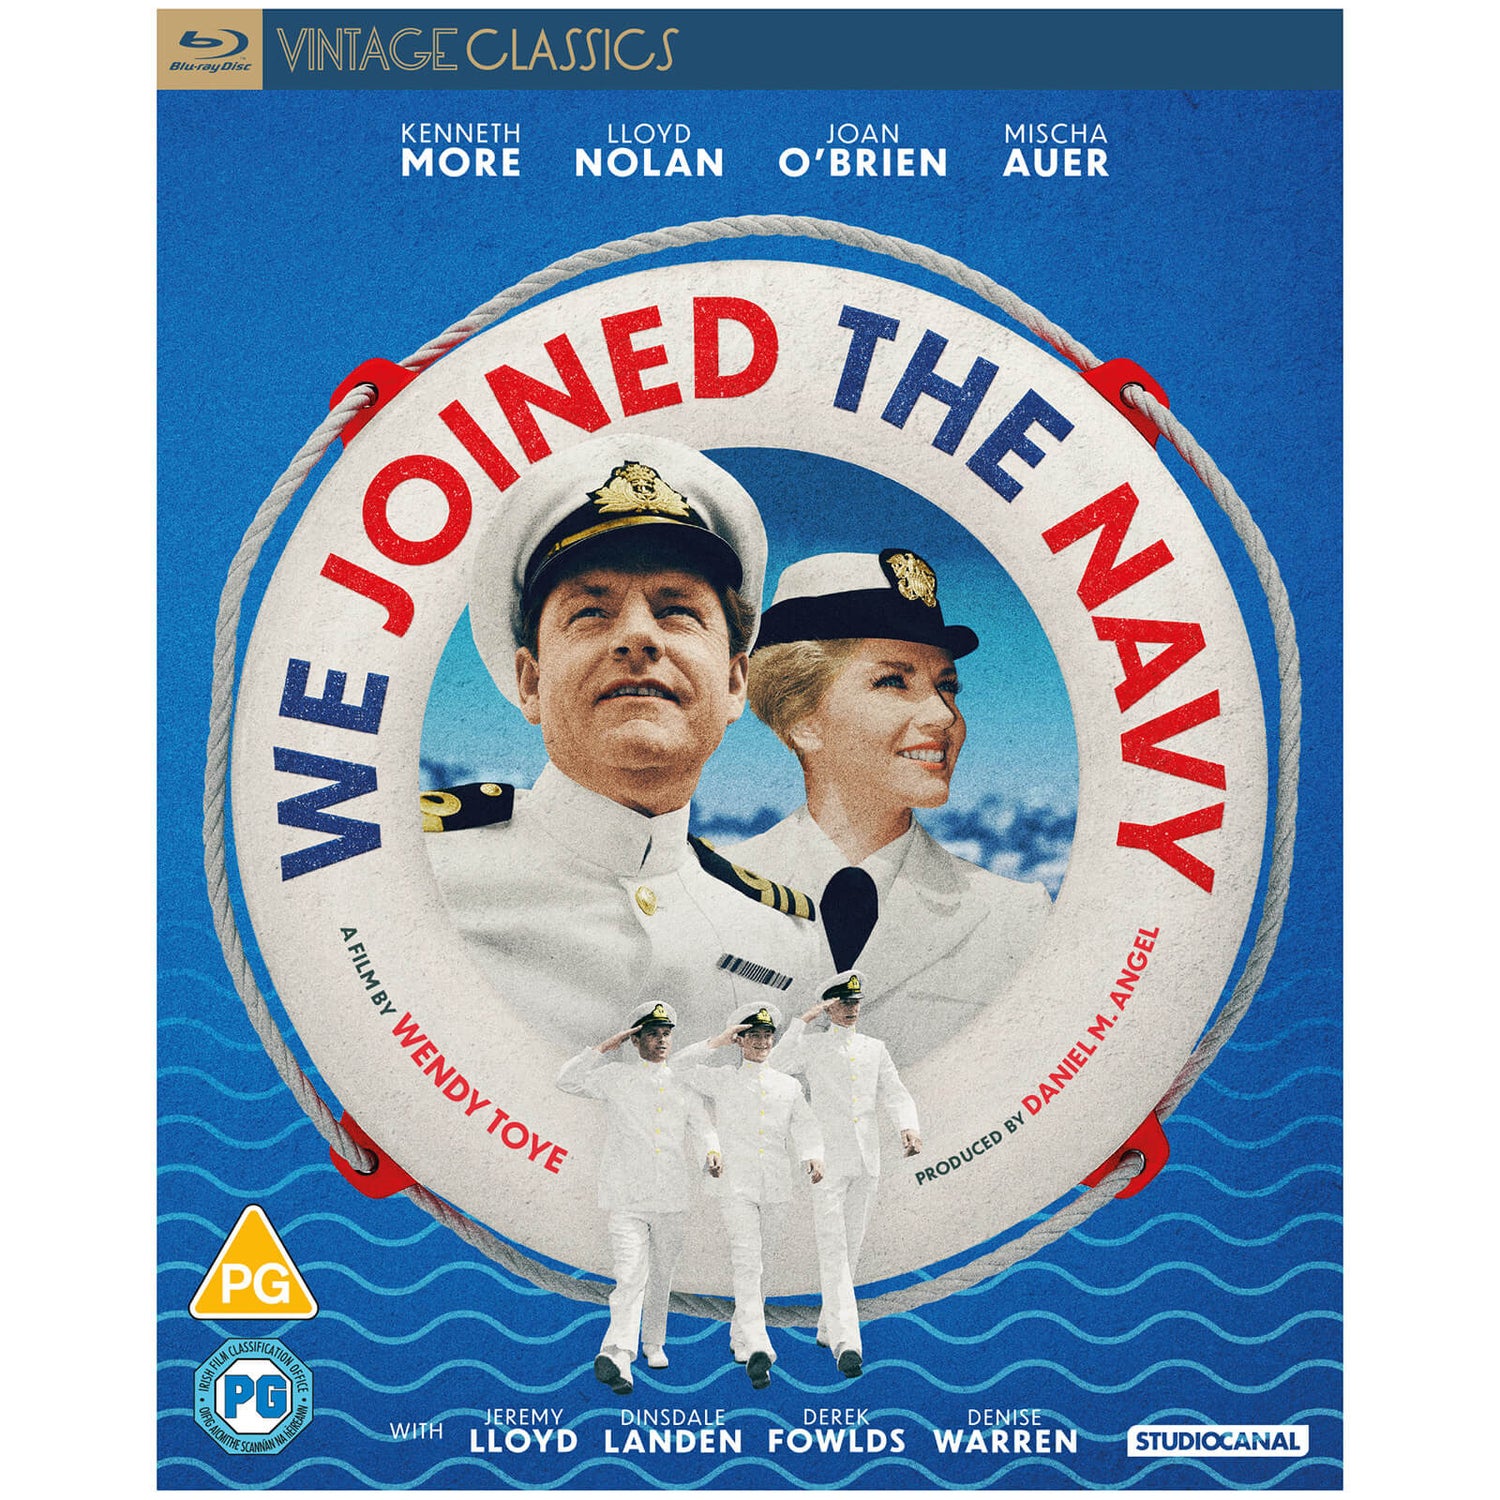 We Joined The Navy (Vintage Classics)